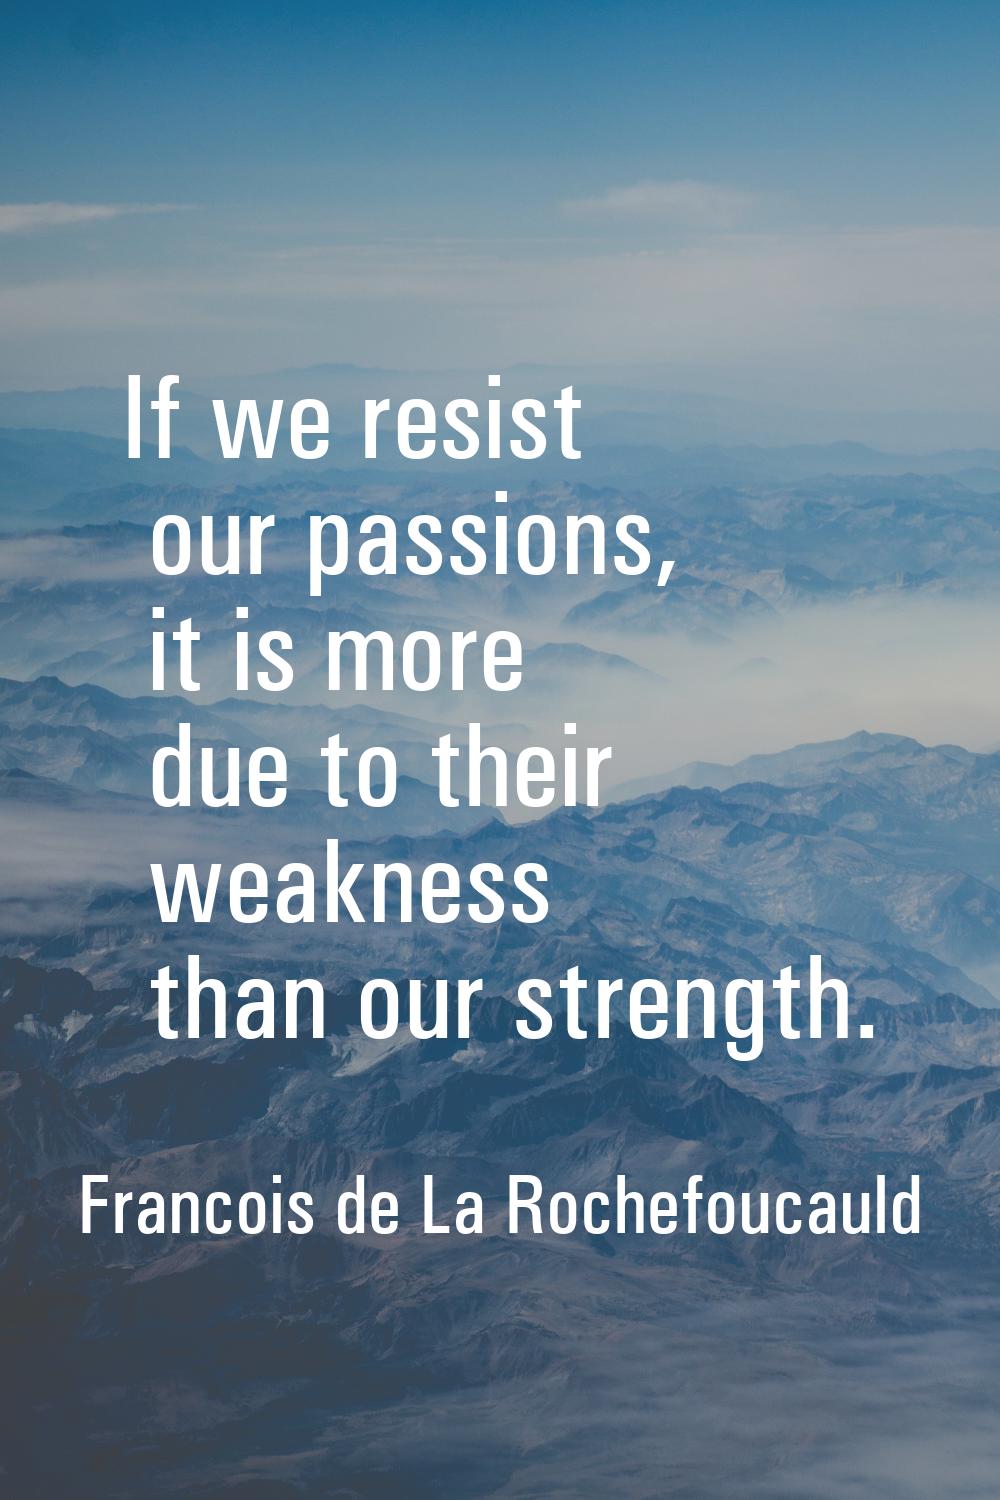 If we resist our passions, it is more due to their weakness than our strength.